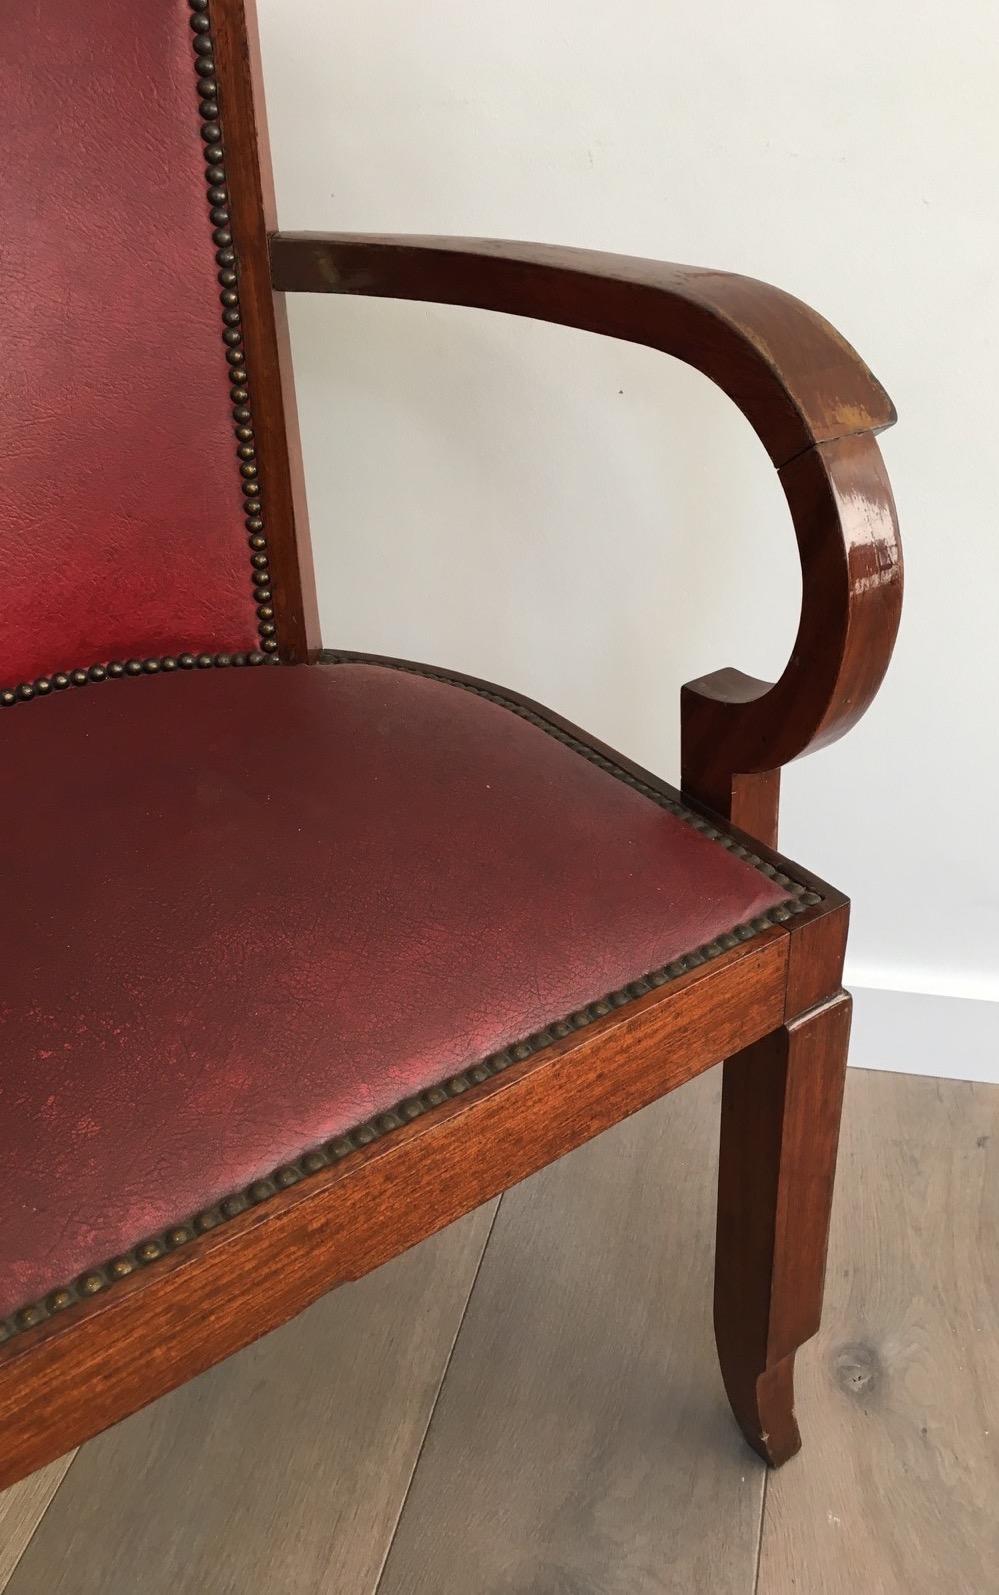 Rare Set of 8 Mahogany and Faux-Leather Art Deco Armchairs, French, circa 1930 For Sale 7